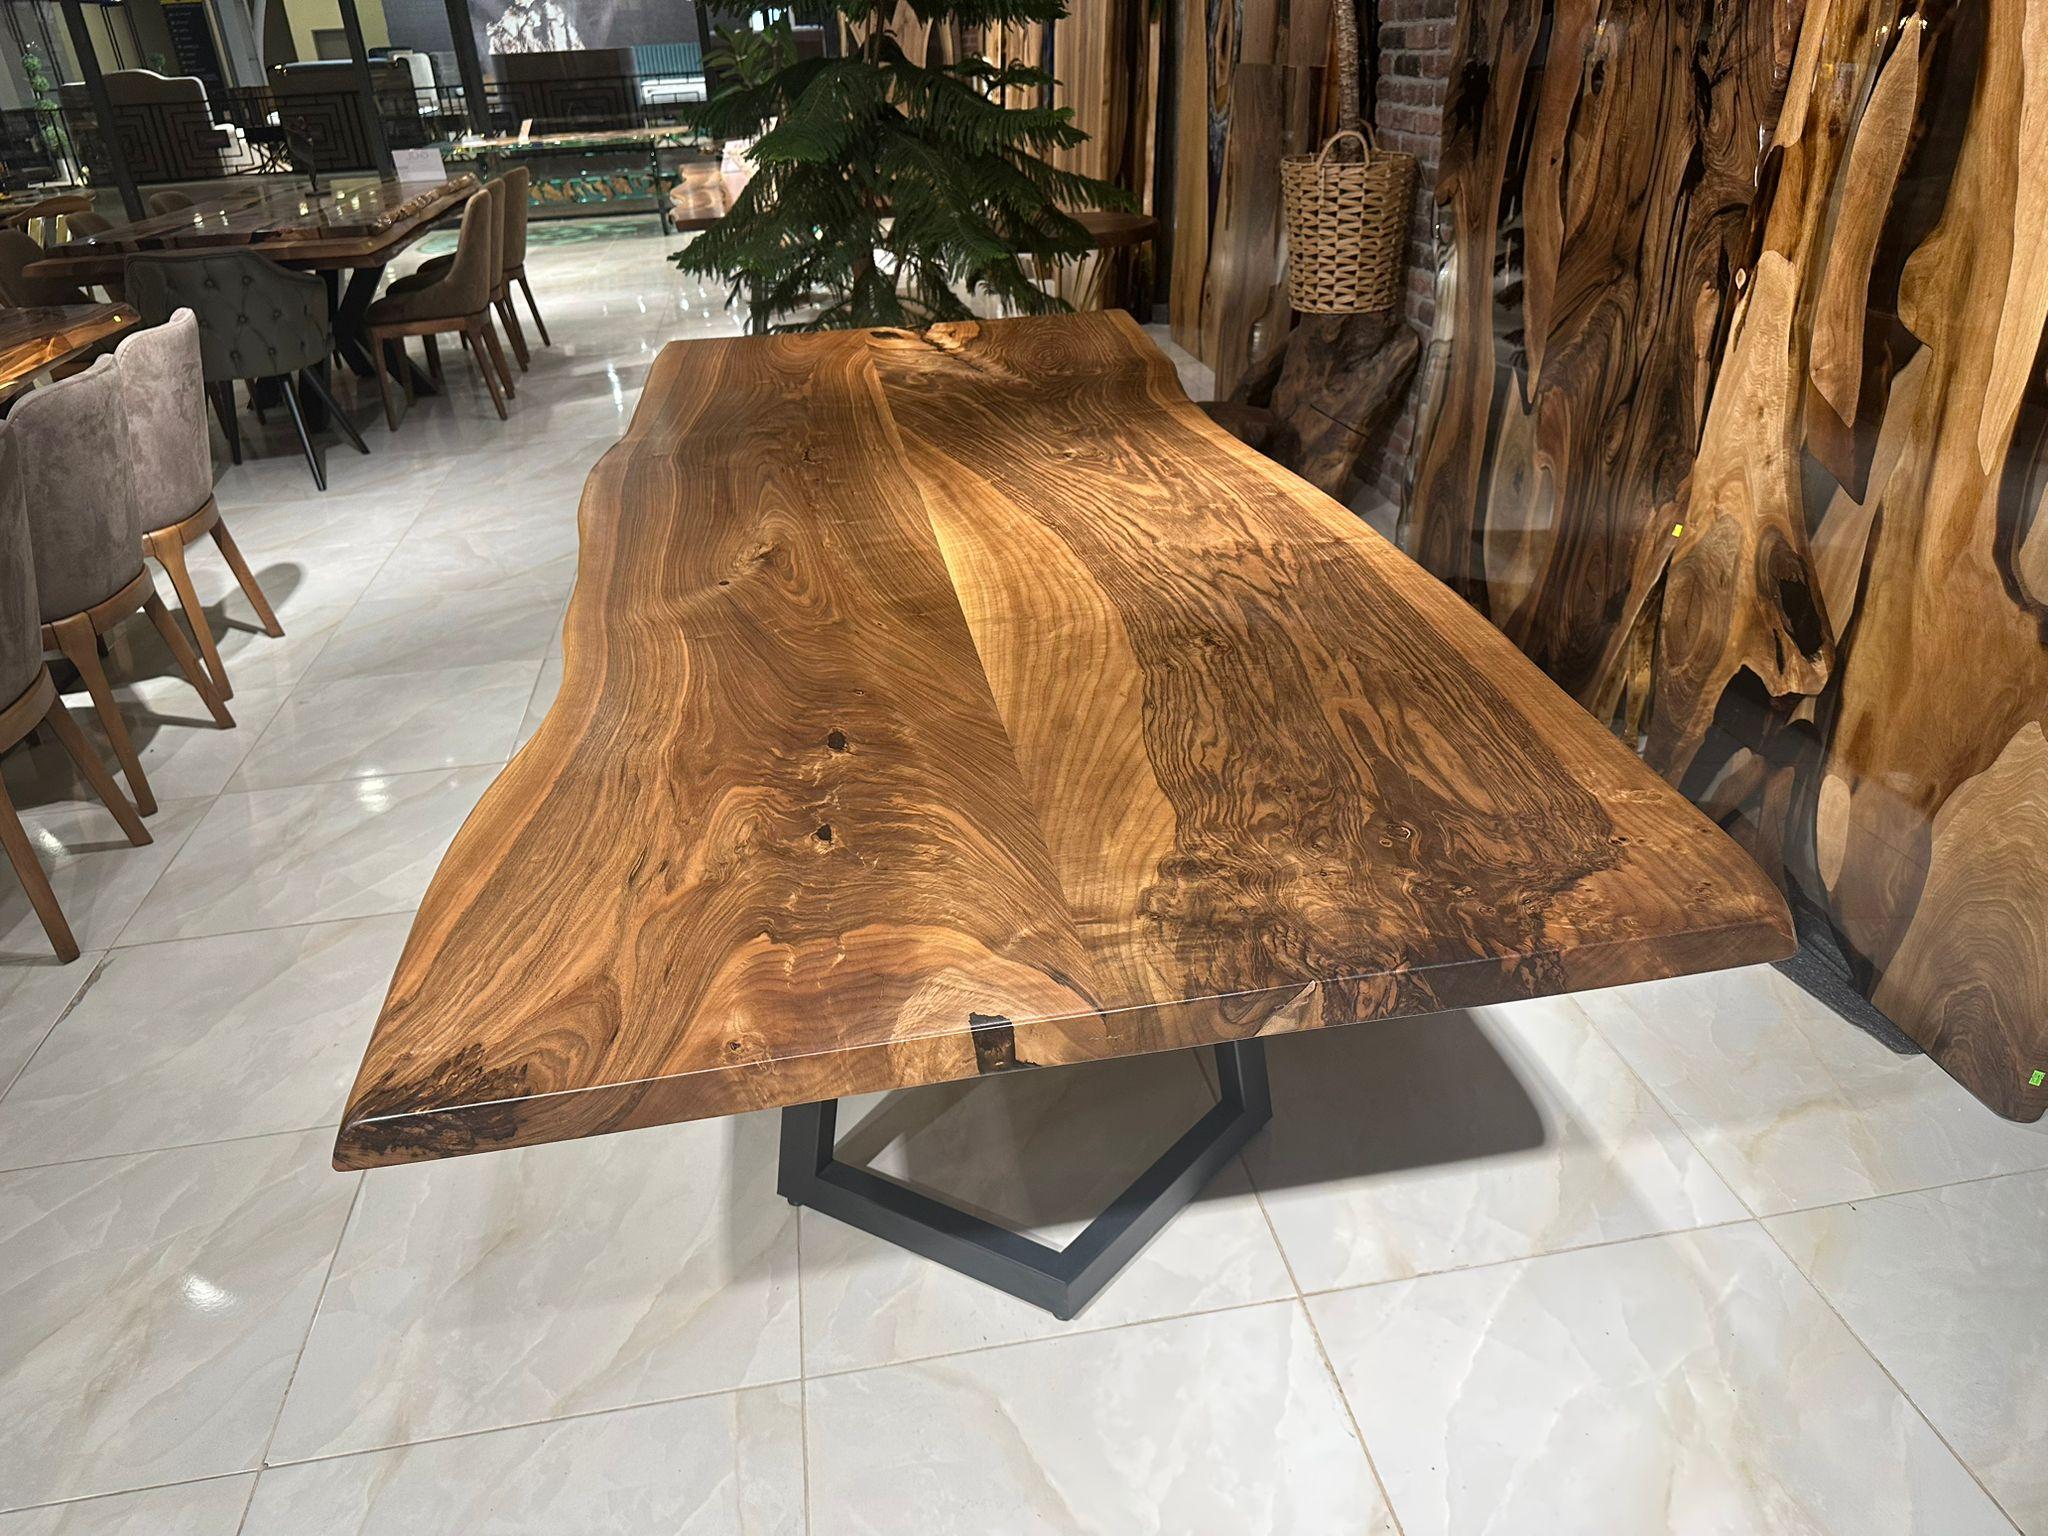 Custom Walnut Live Edge Kitchen Table 

This table is made of Walnut Wood. The grains and texture of the wood describe what a natural walnut woods looks like.
It can be used as a dining table or as a conference table. Suitable for indoor use.

All